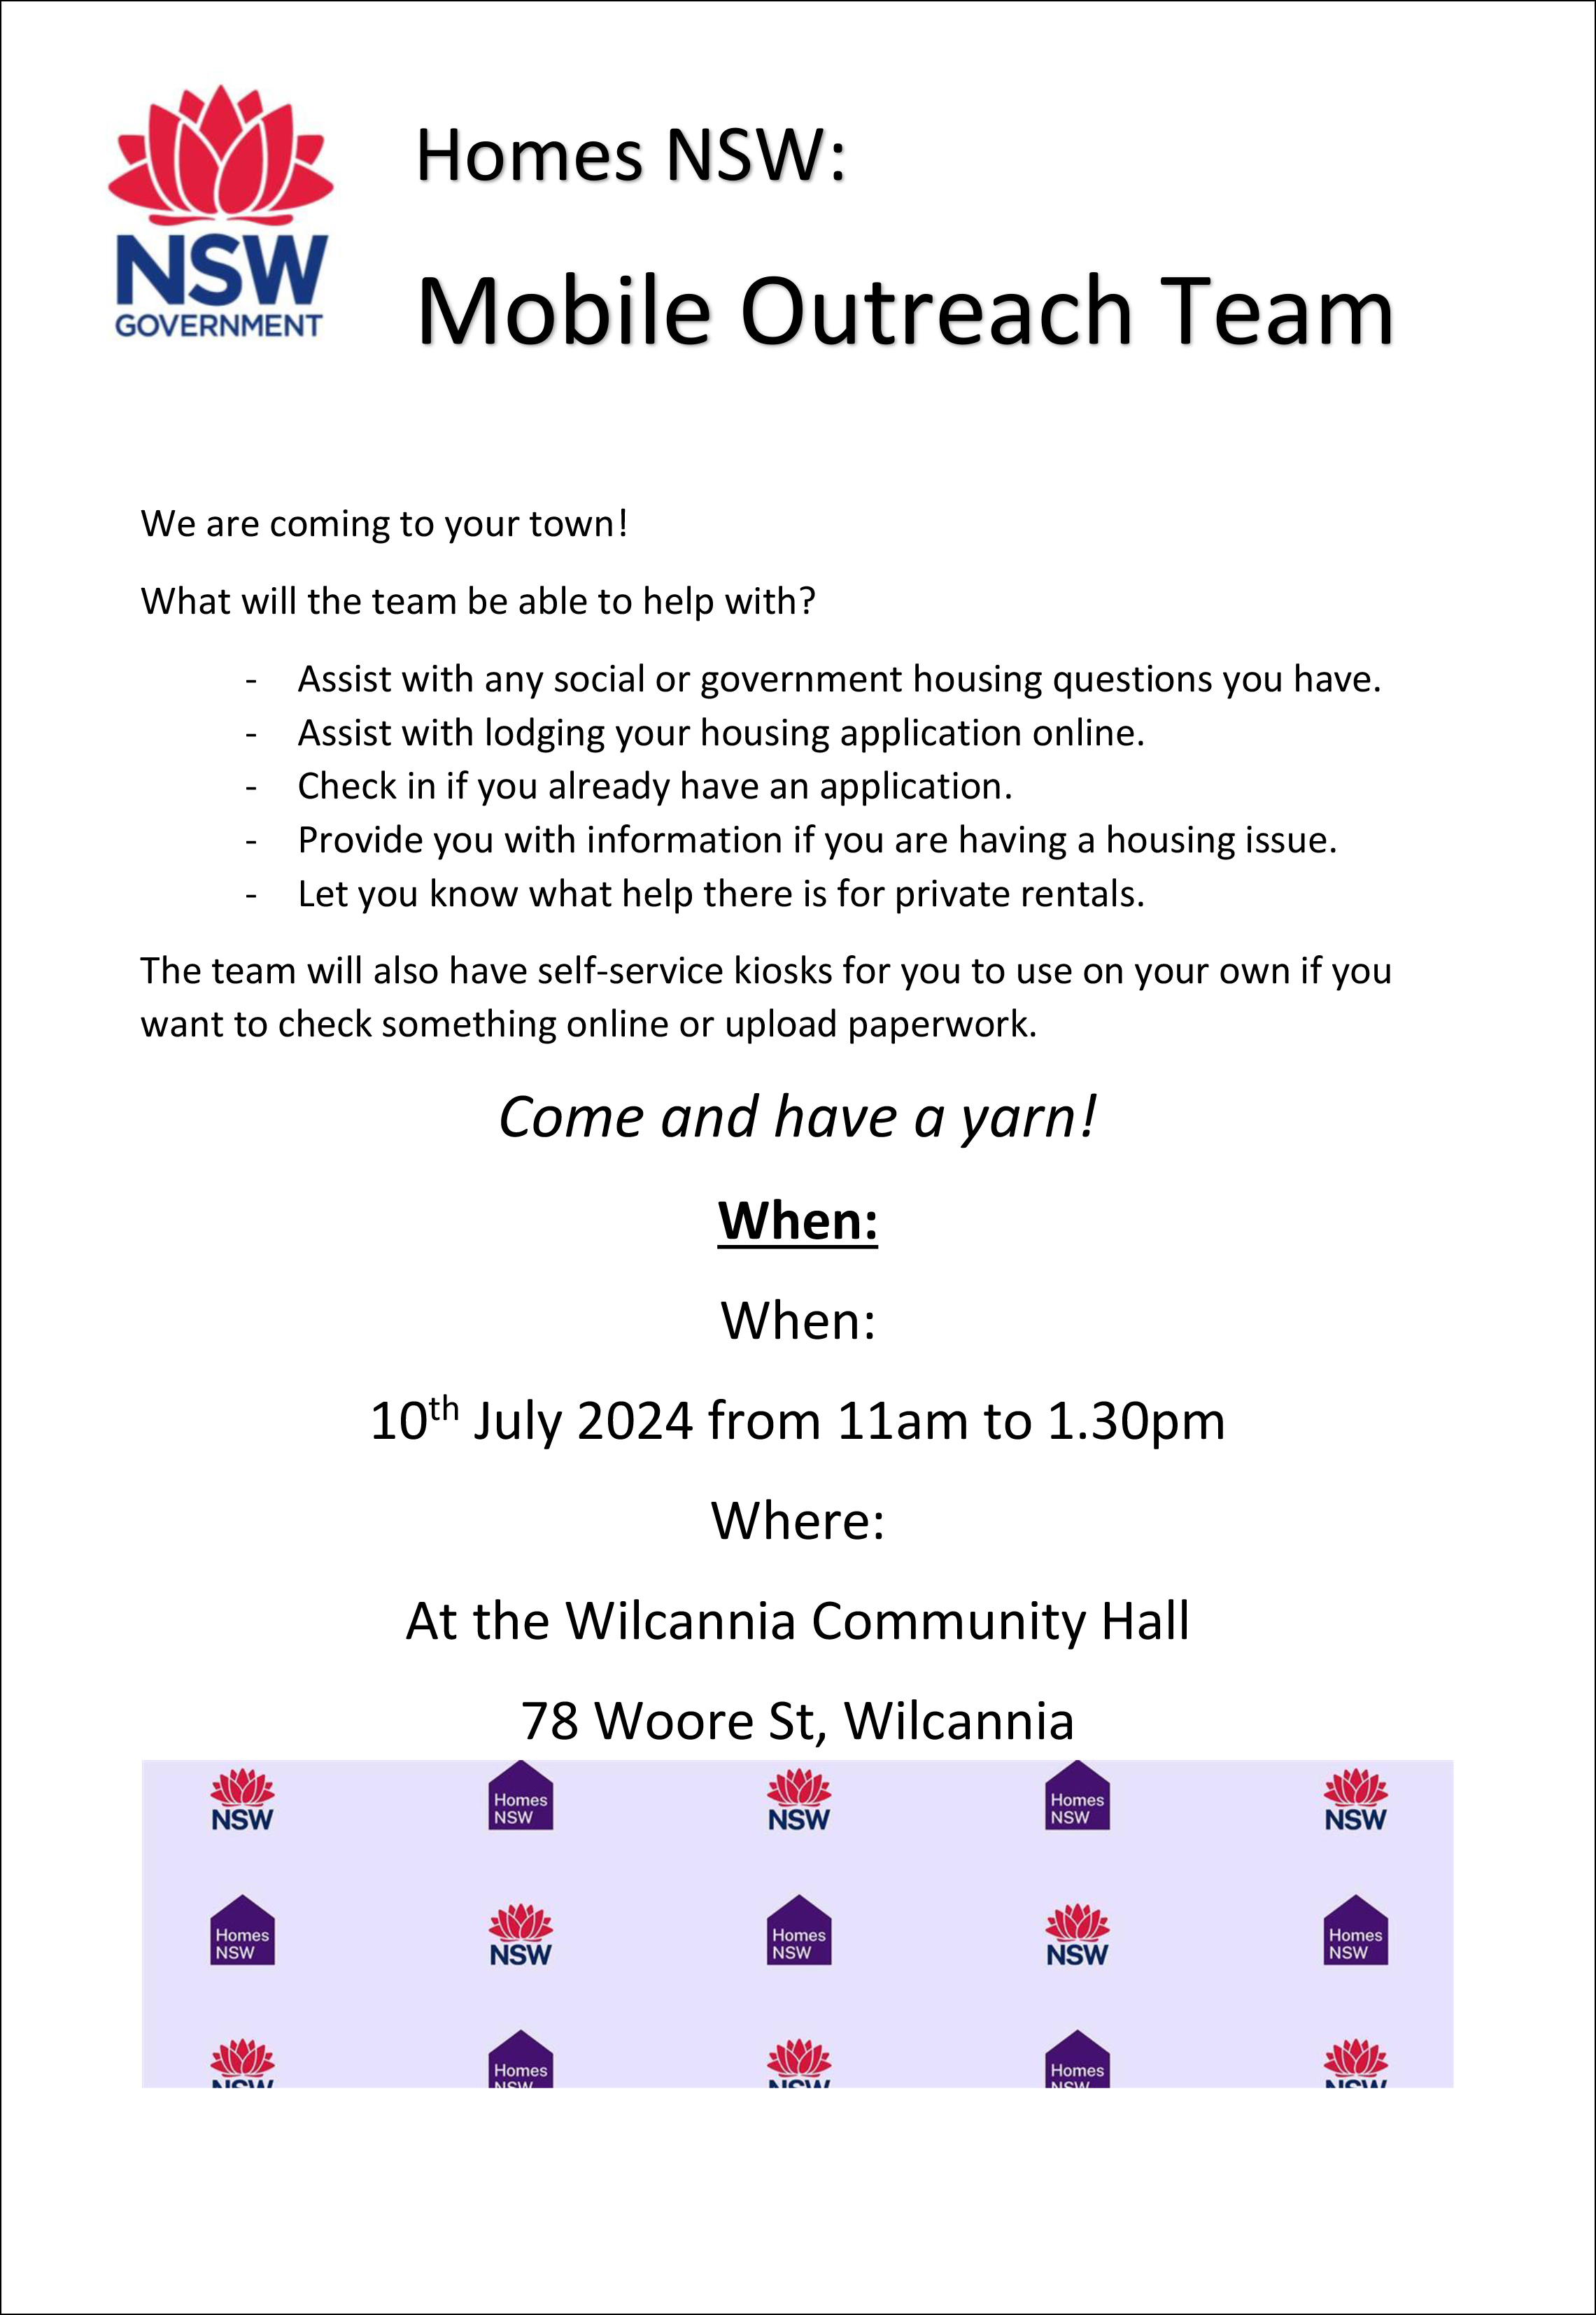 Mobile-Outreach-Team-Flyer-Wilcannia-10th-July-2024.jpg